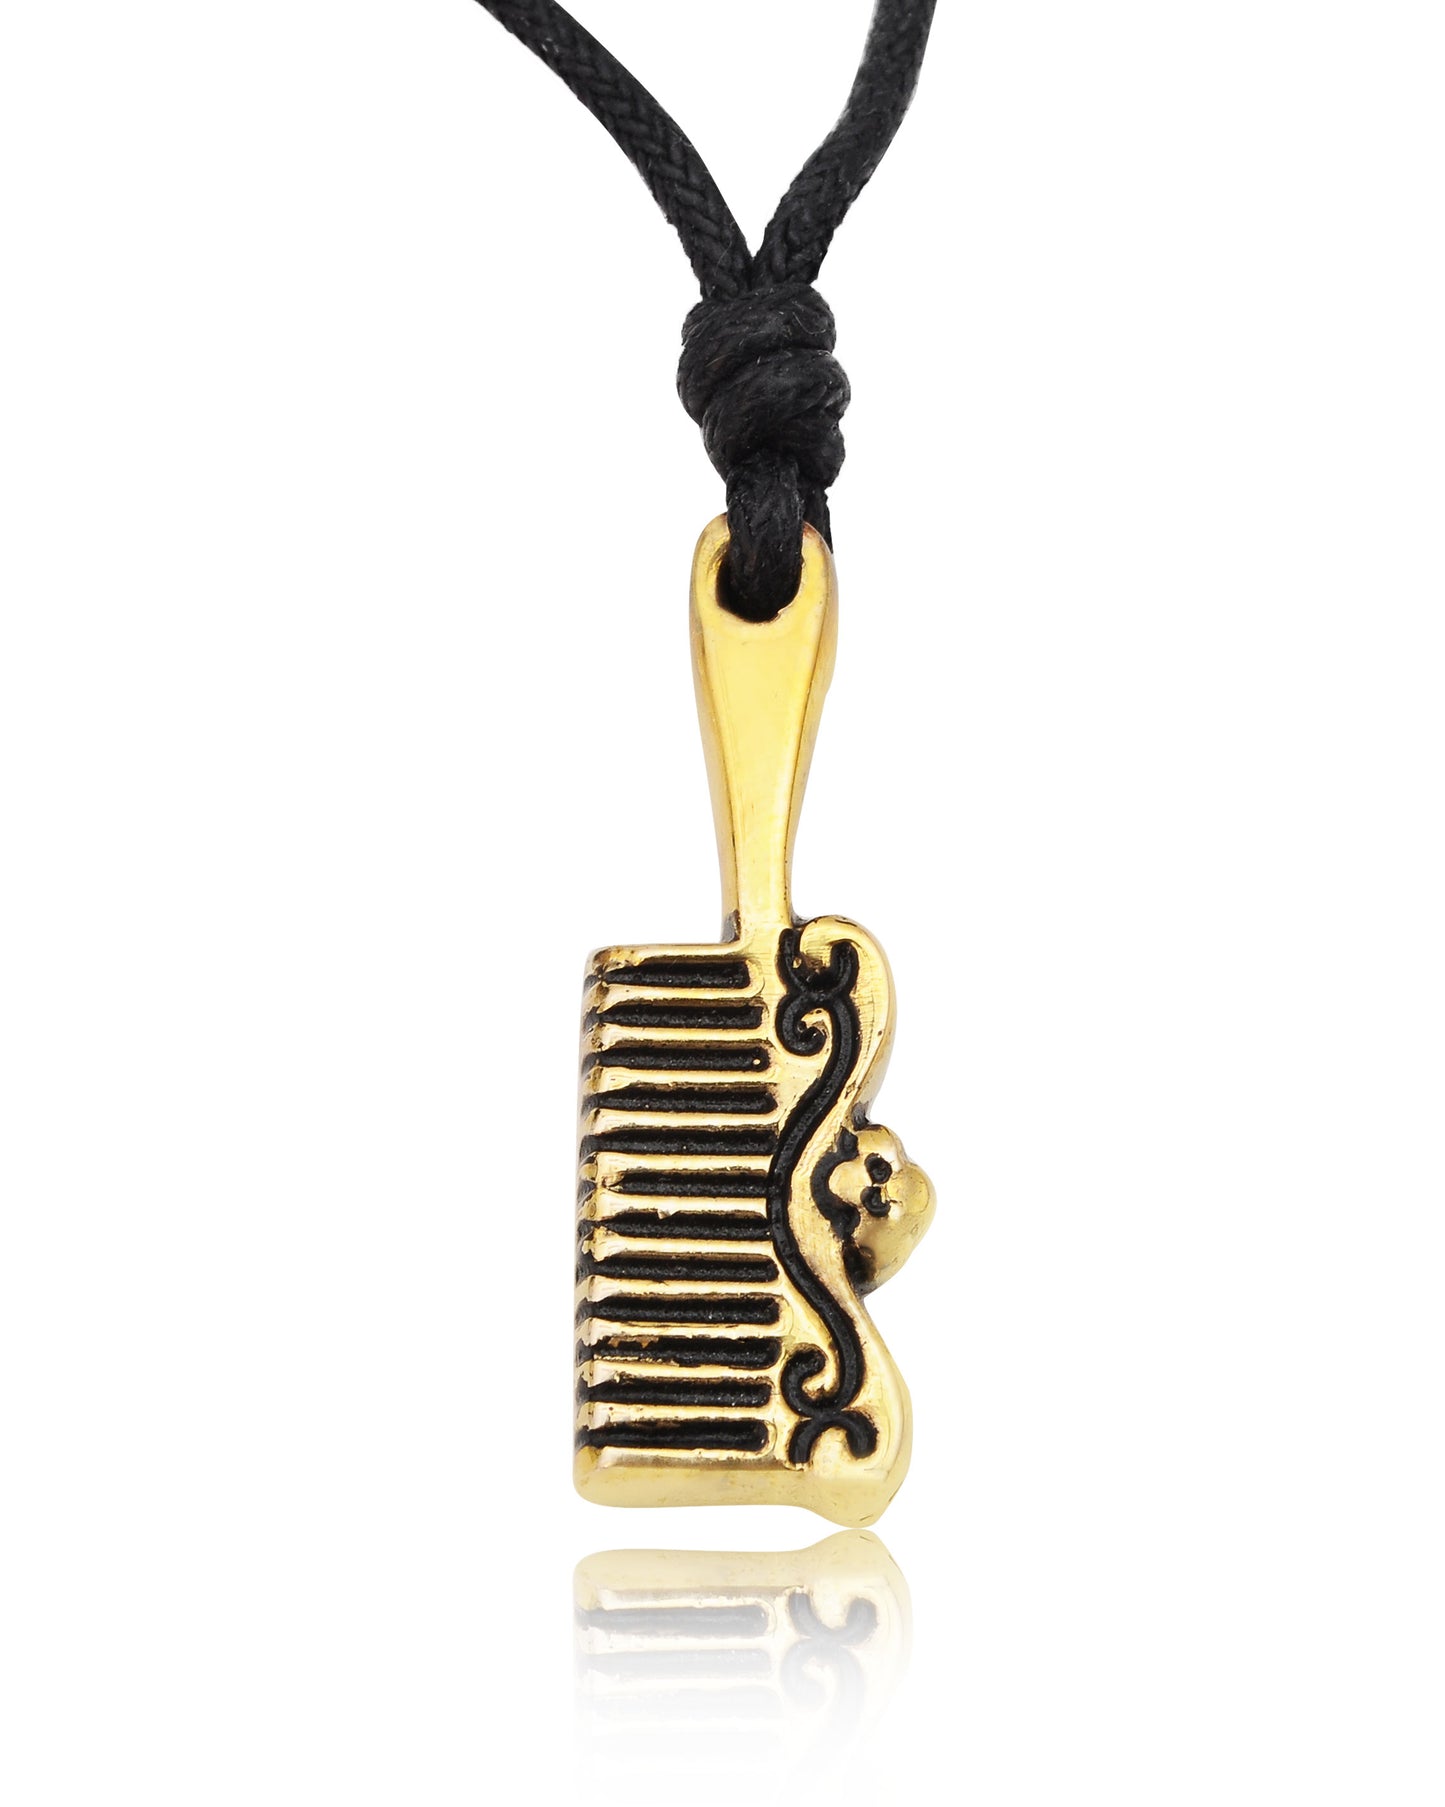 Cute Golden Comb Brush Gold Brass Charm Necklace Pendant Jewelry